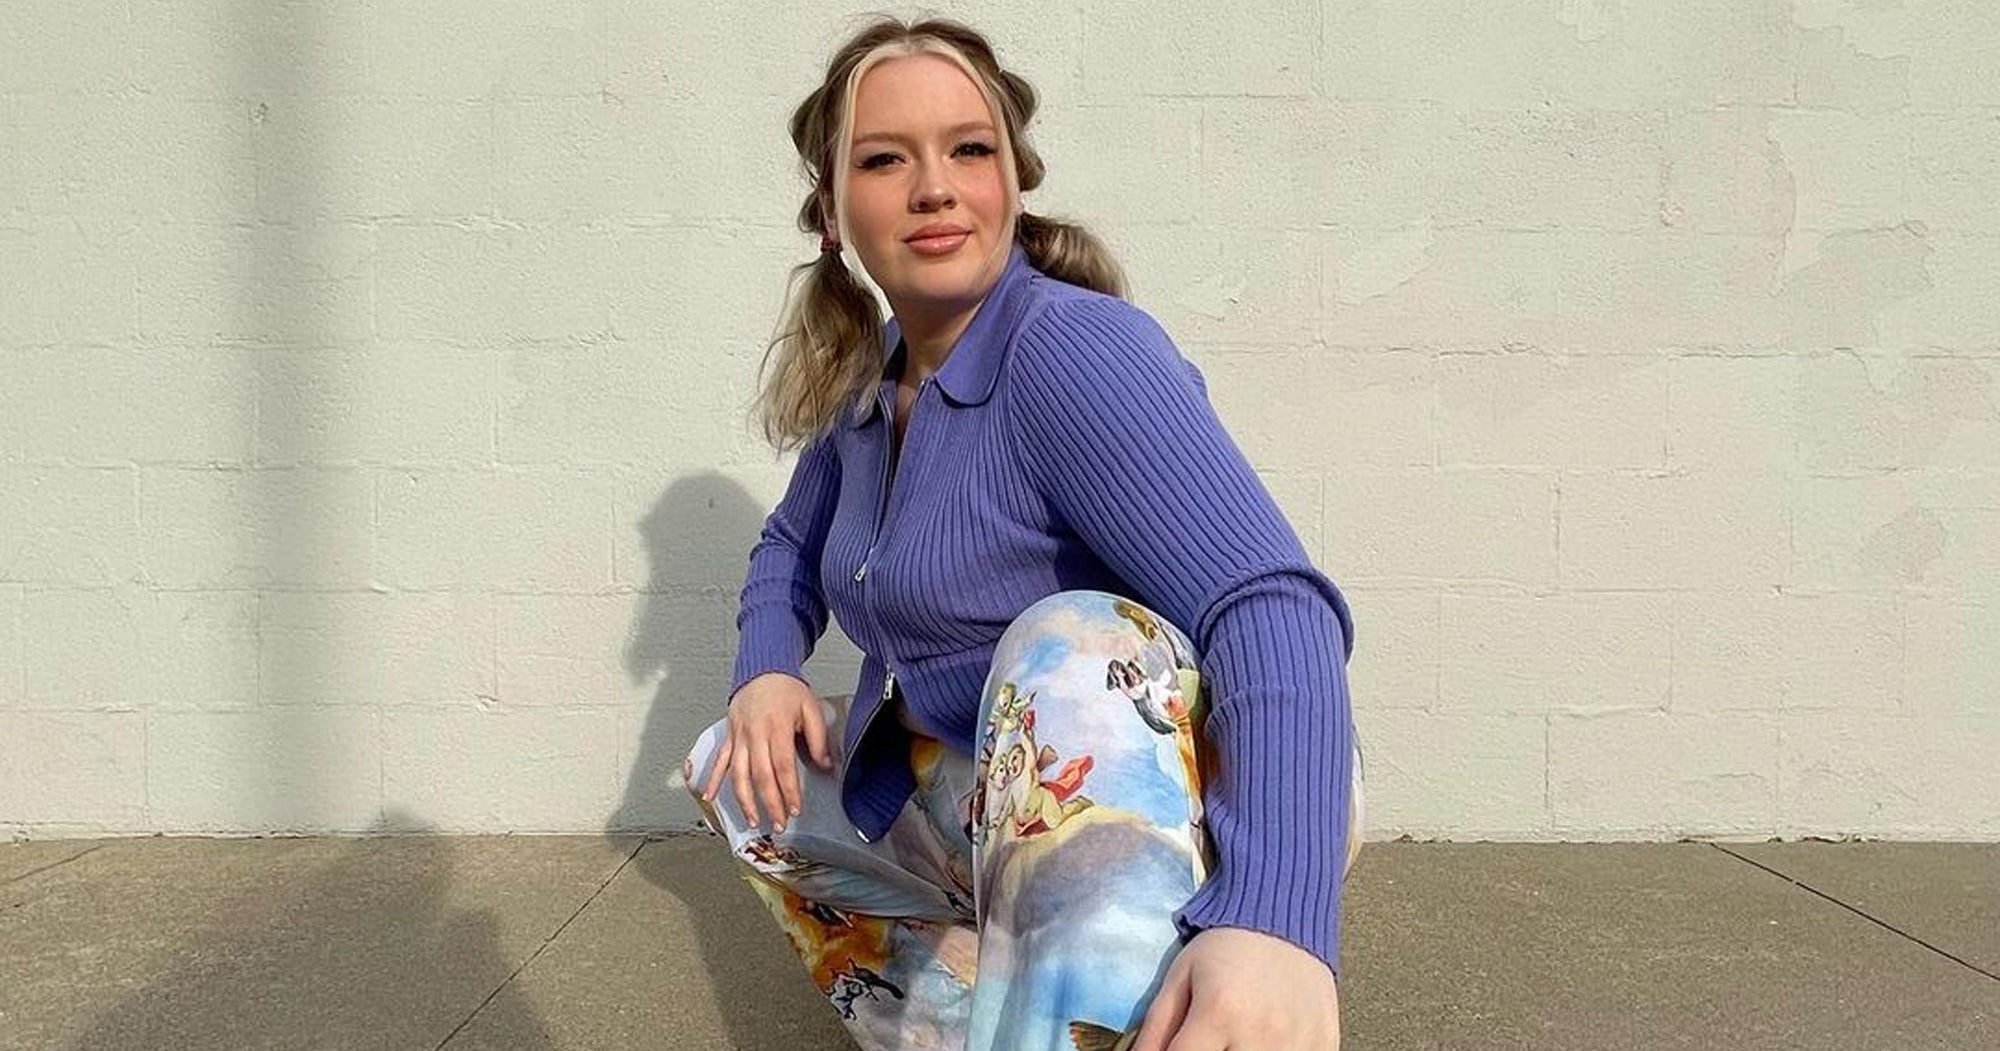 Recreating Outfits For Plus-Size Bodies Is TikTok’s Latest Fashion Trend